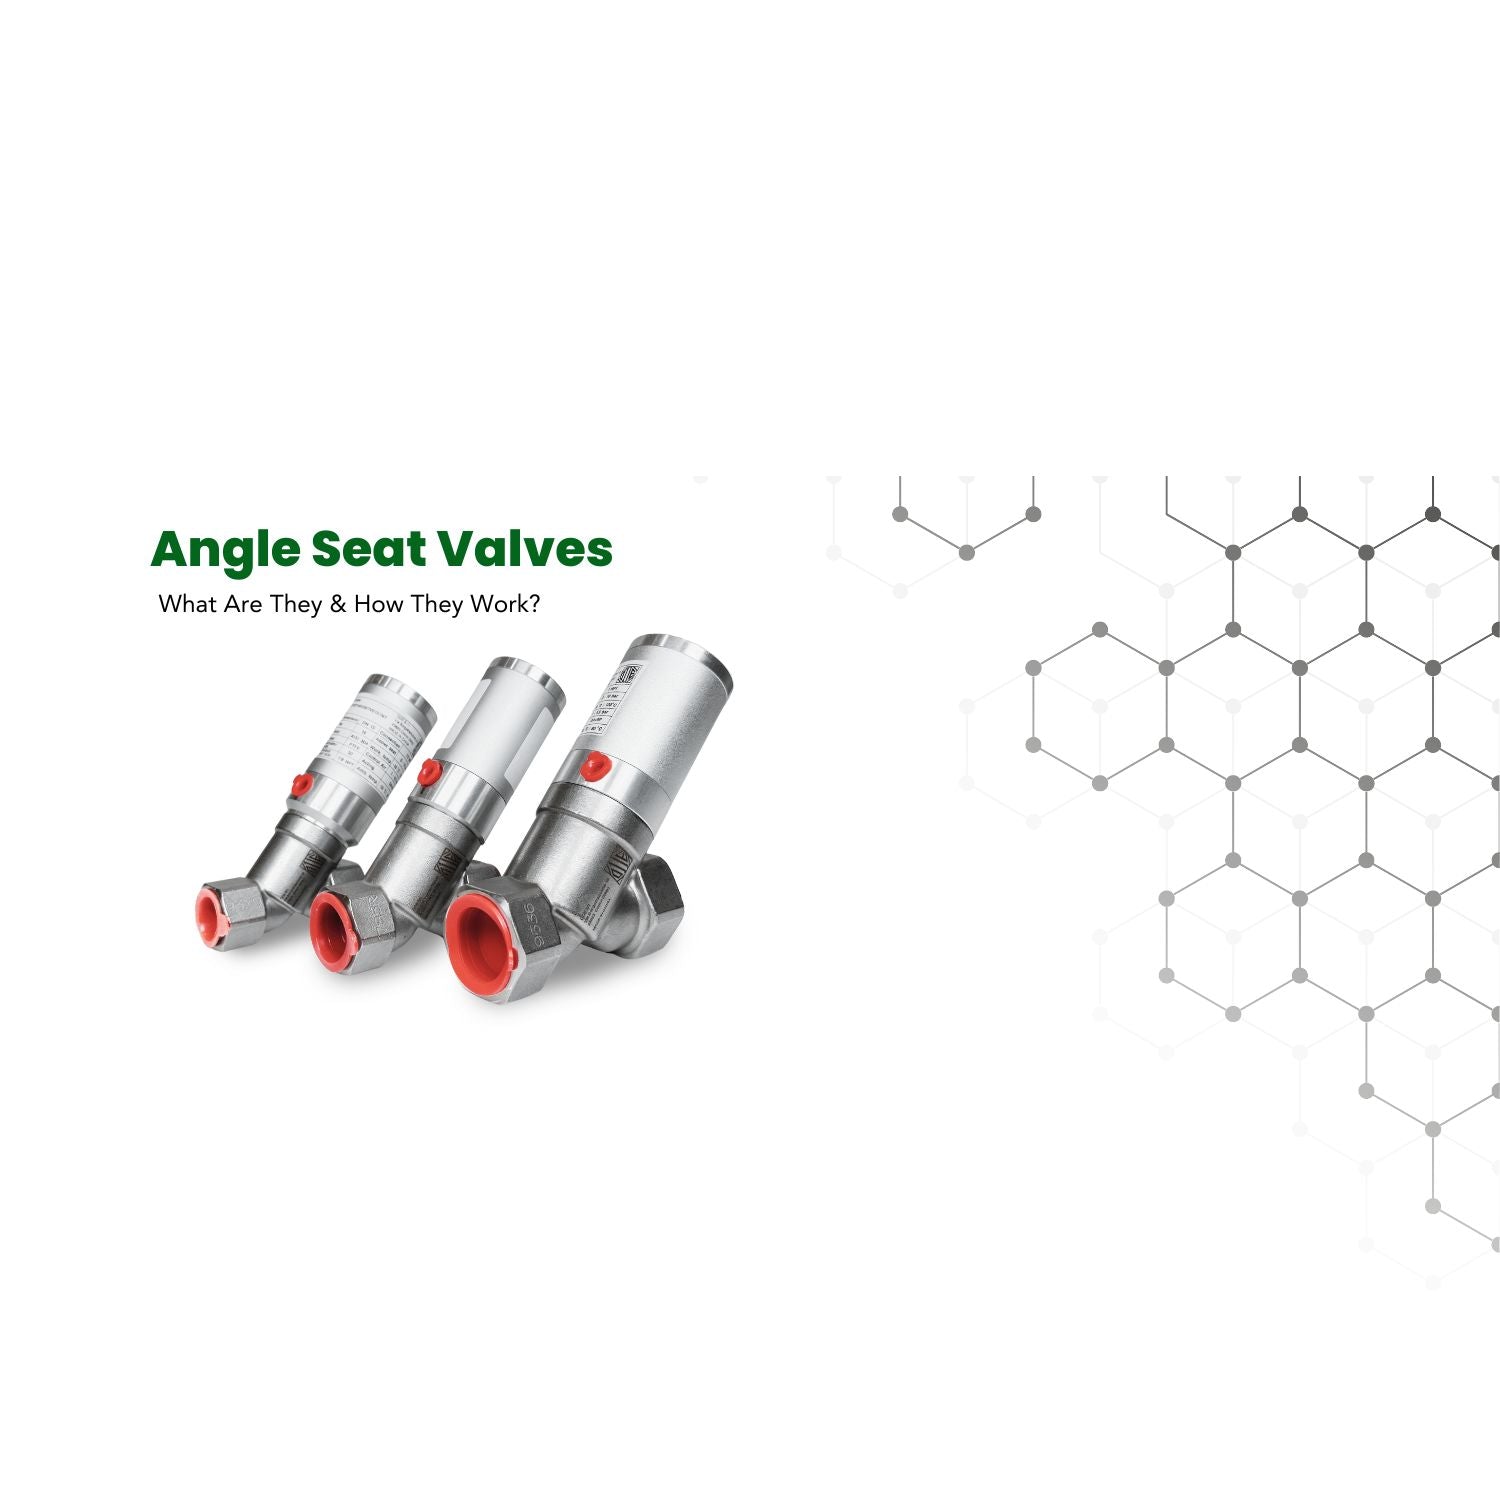 What Are Angle Seat Valves & How Do They Work?